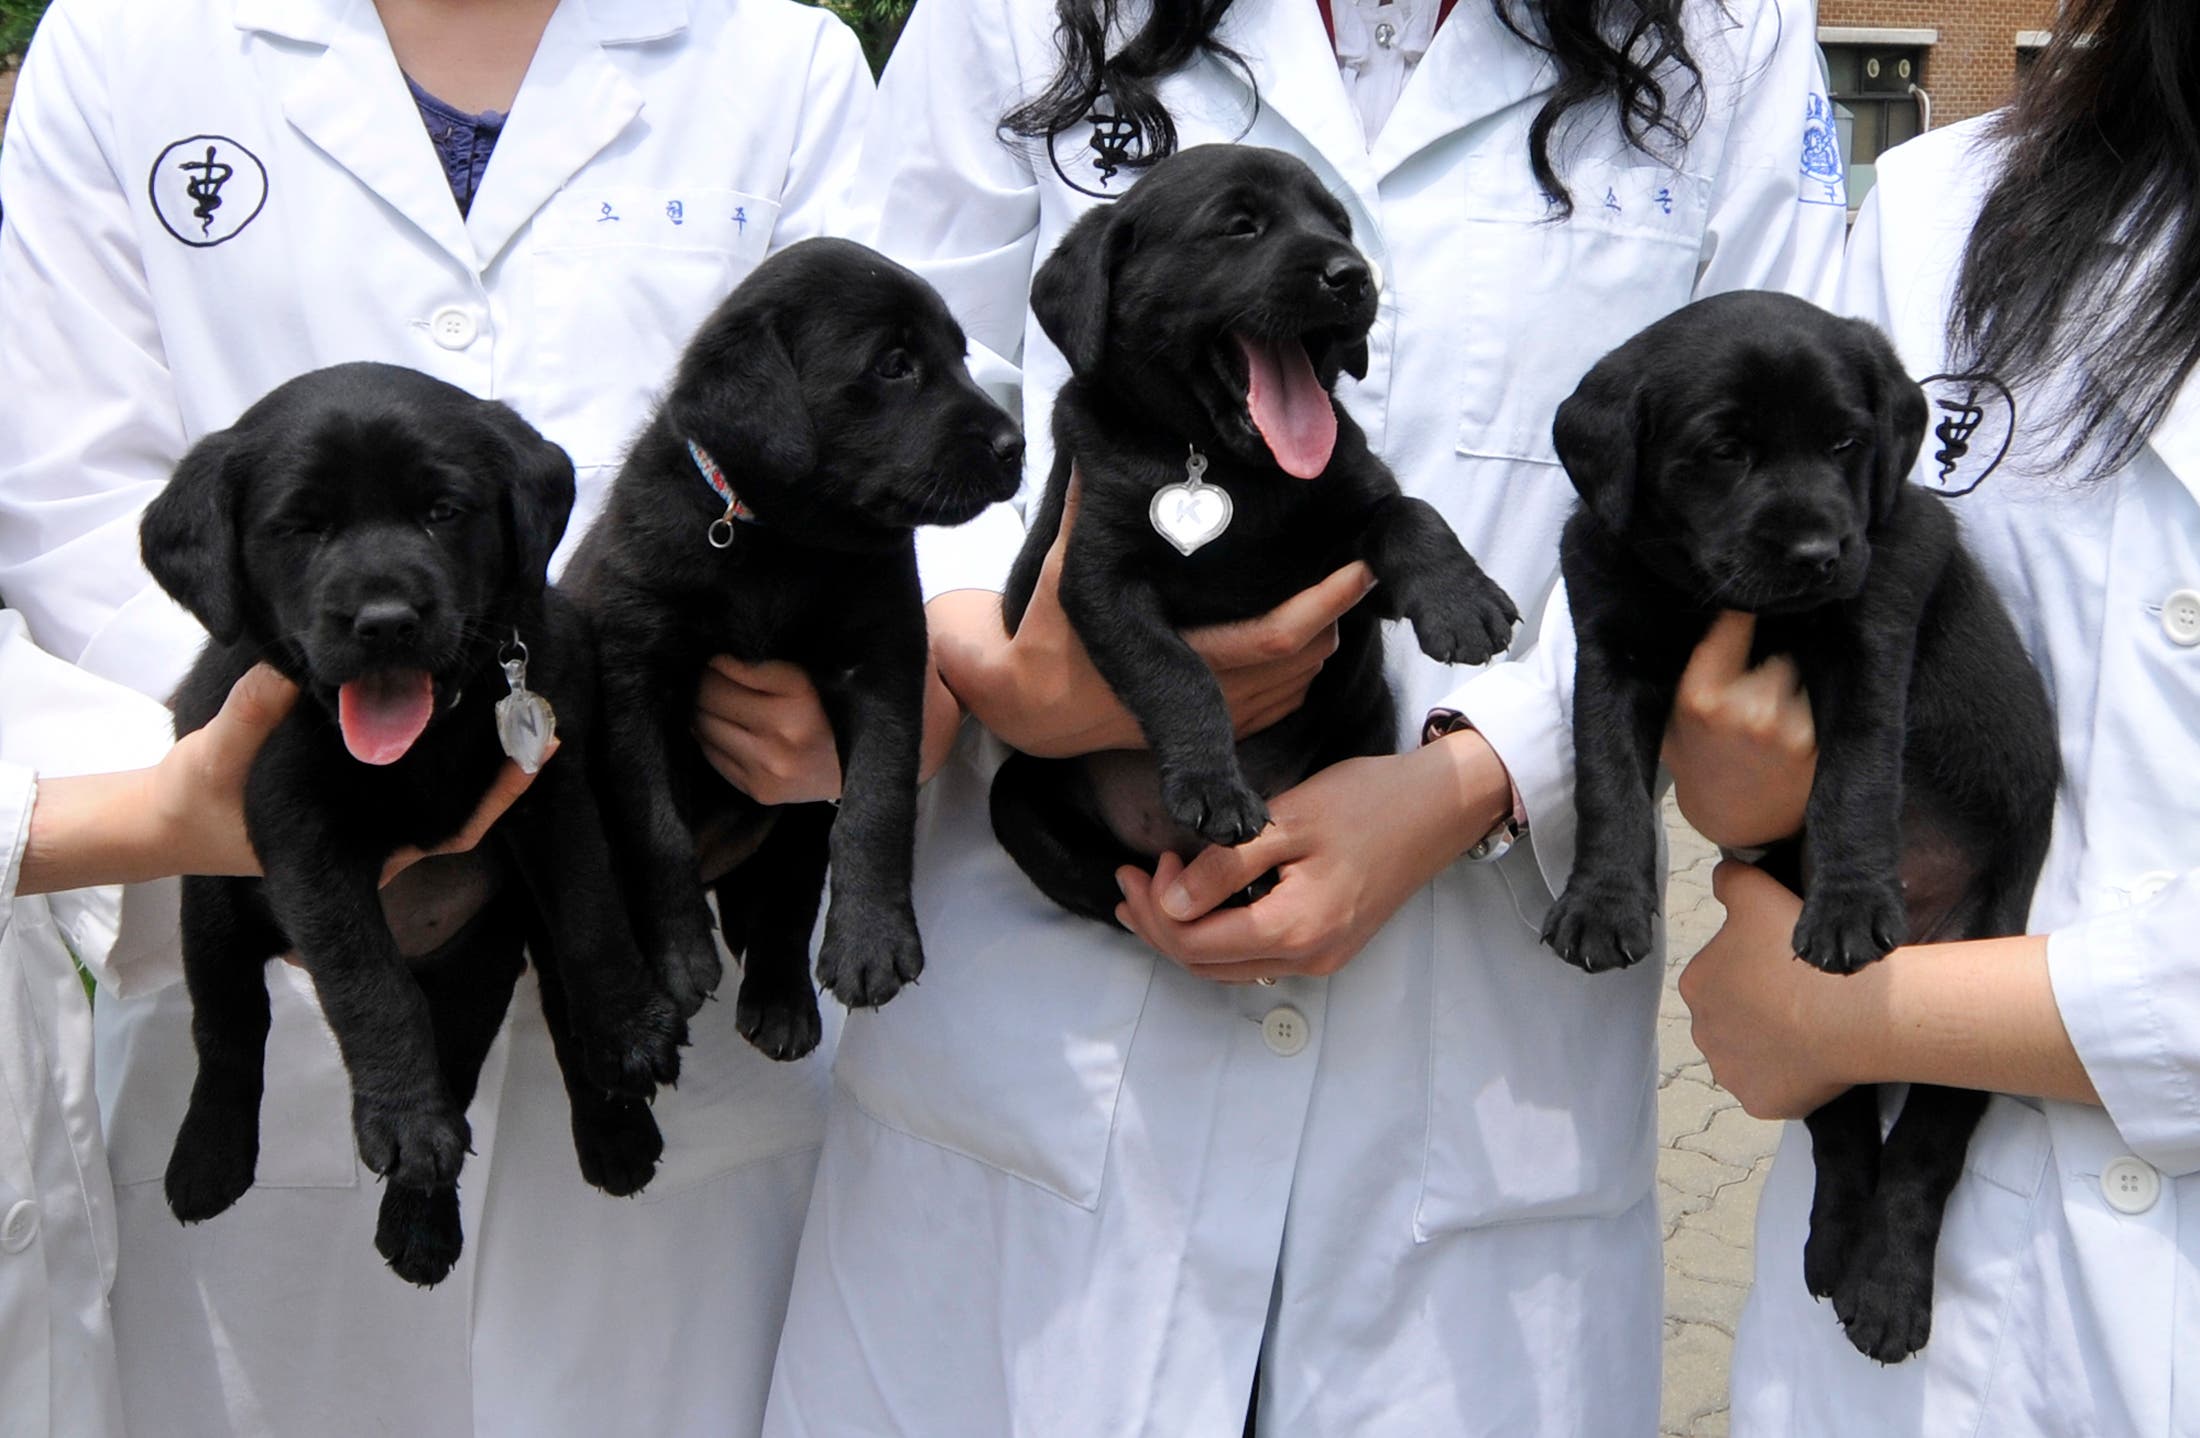 Four puppies, cloned from a labrador retriever, pose for a photograph with researchers at Seoul National University's College of Veterinary Medicine in Seoul July 1, 2008. Two South Korean labs are offering pet owners the chance to clone dogs, but for those looking to bring back a beloved beagle, be ready to wait in line and have plenty of cash on hand. REUTERS/Ben Weller (SOUTH KOREA)